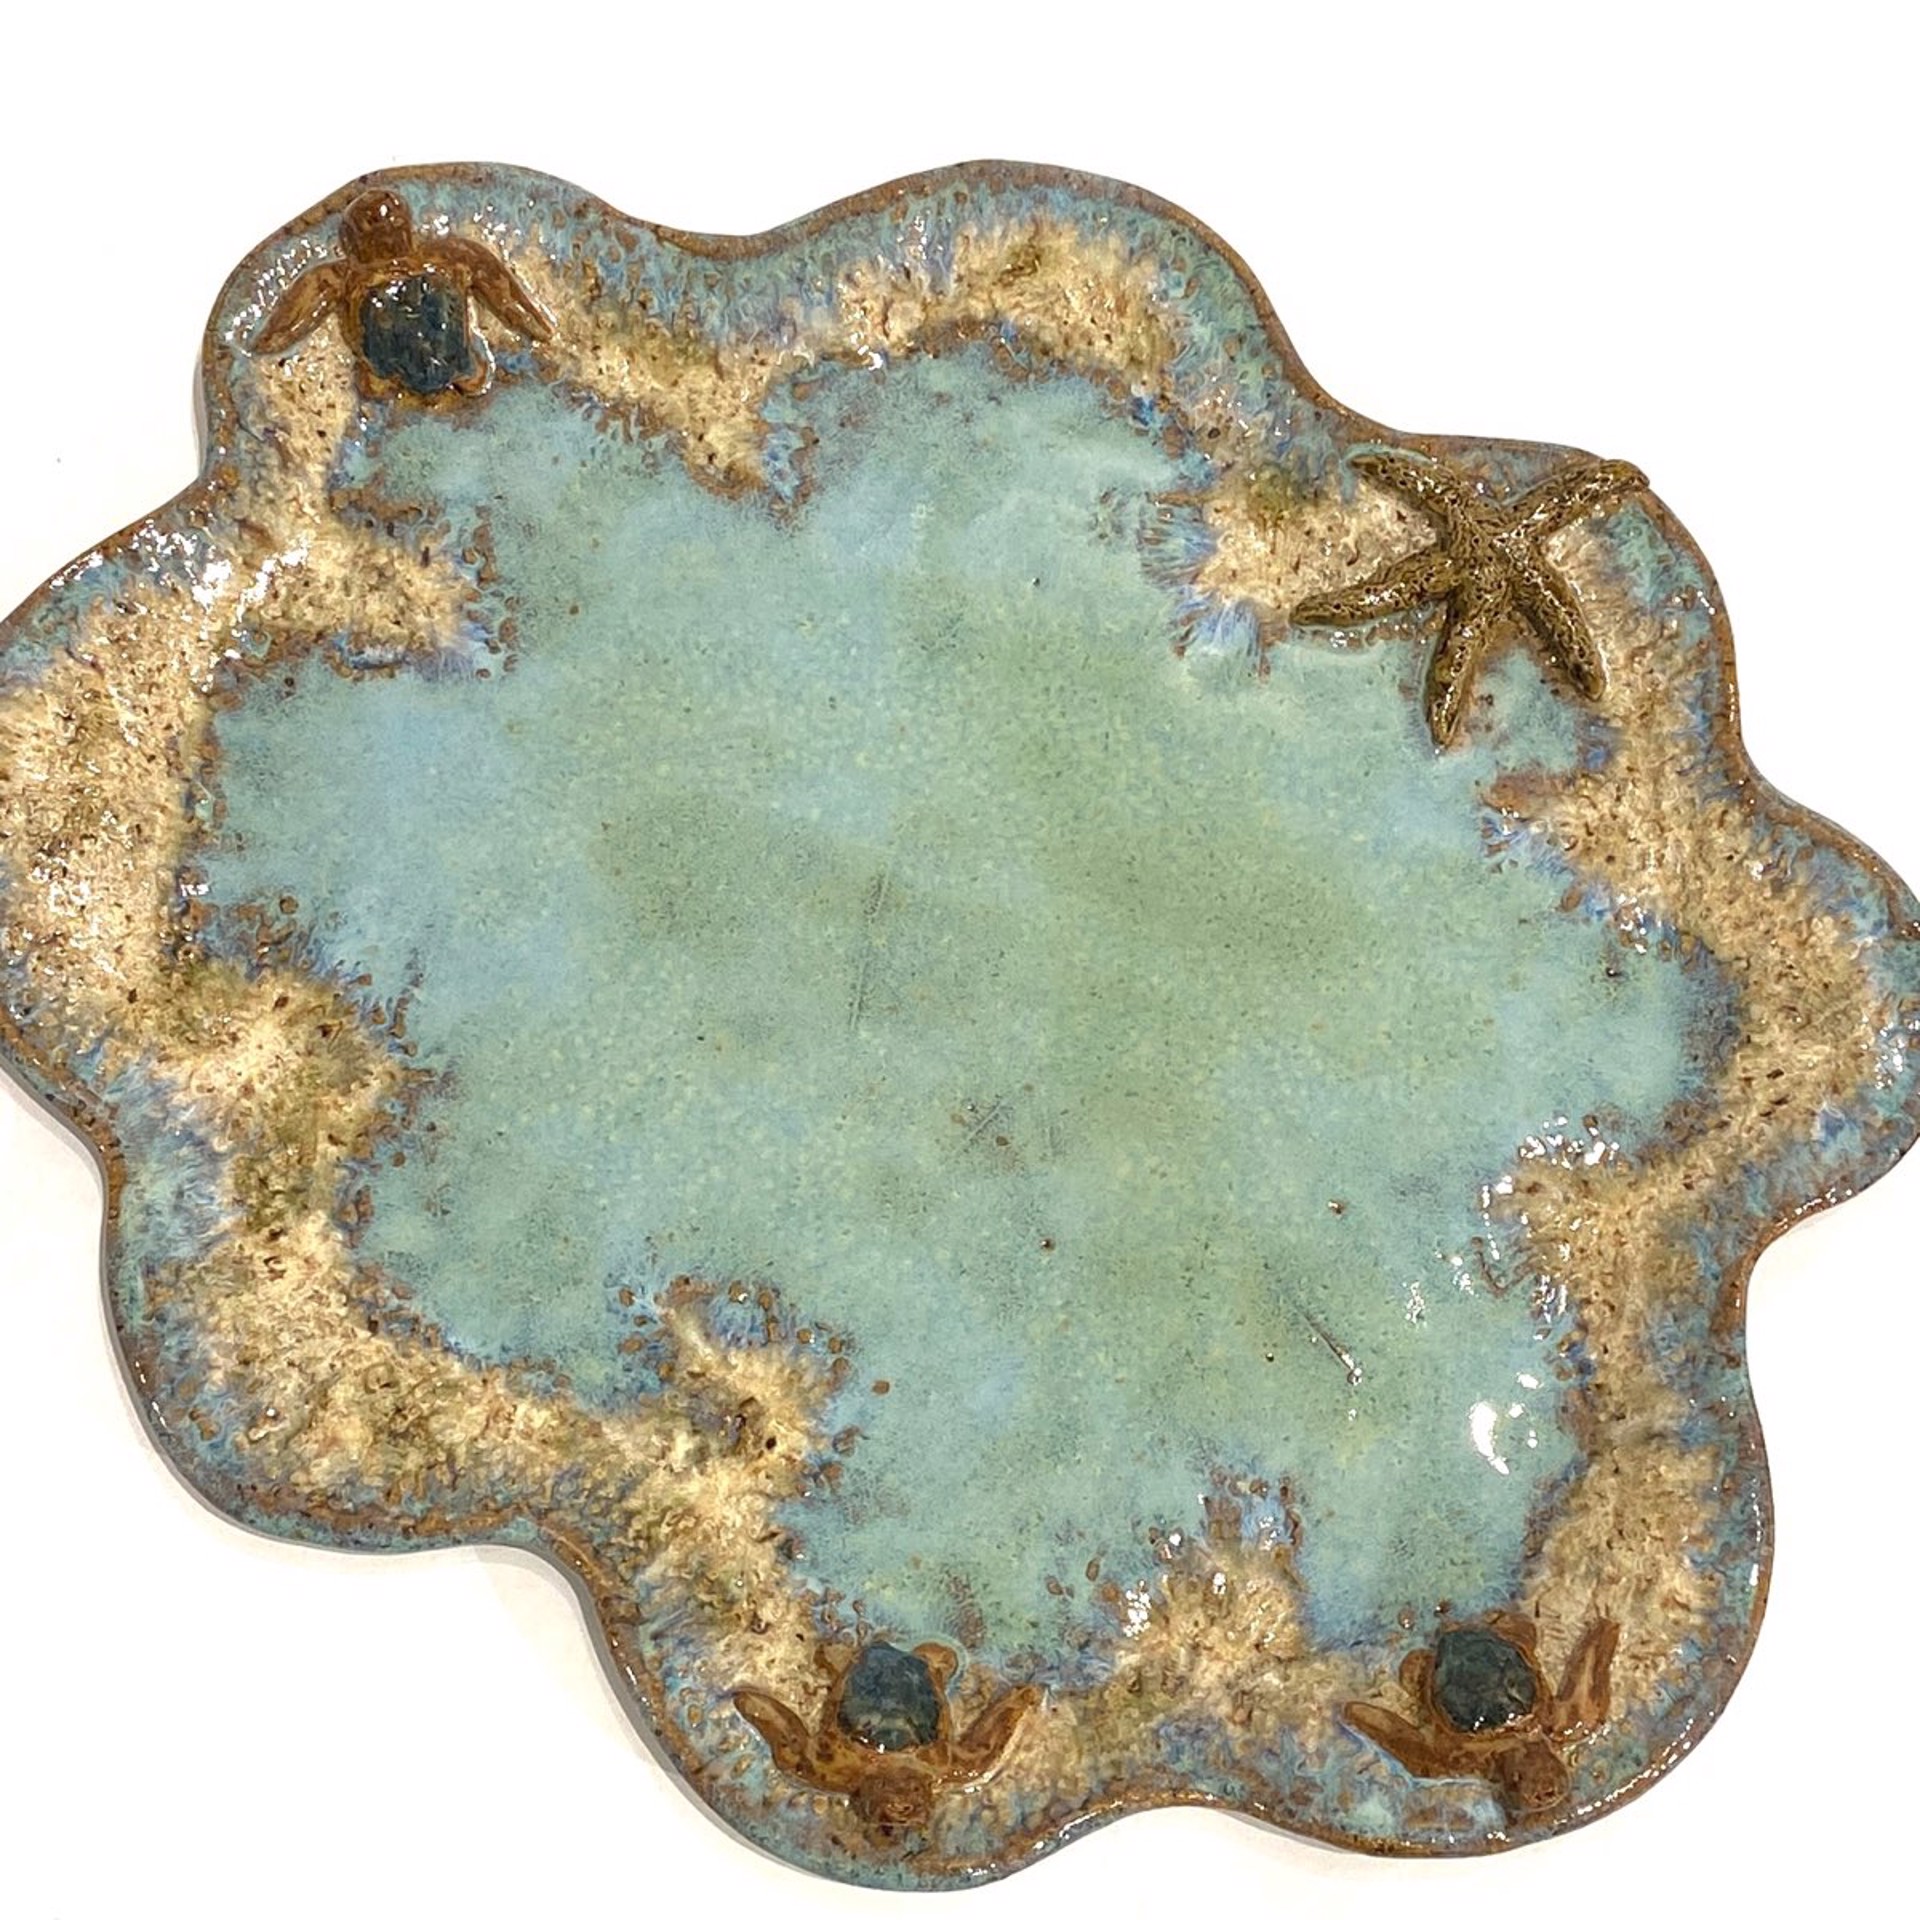 LG23-992 Large Platter with Two Turtles and Starfish (Green Glaze) by Jim & Steffi Logan